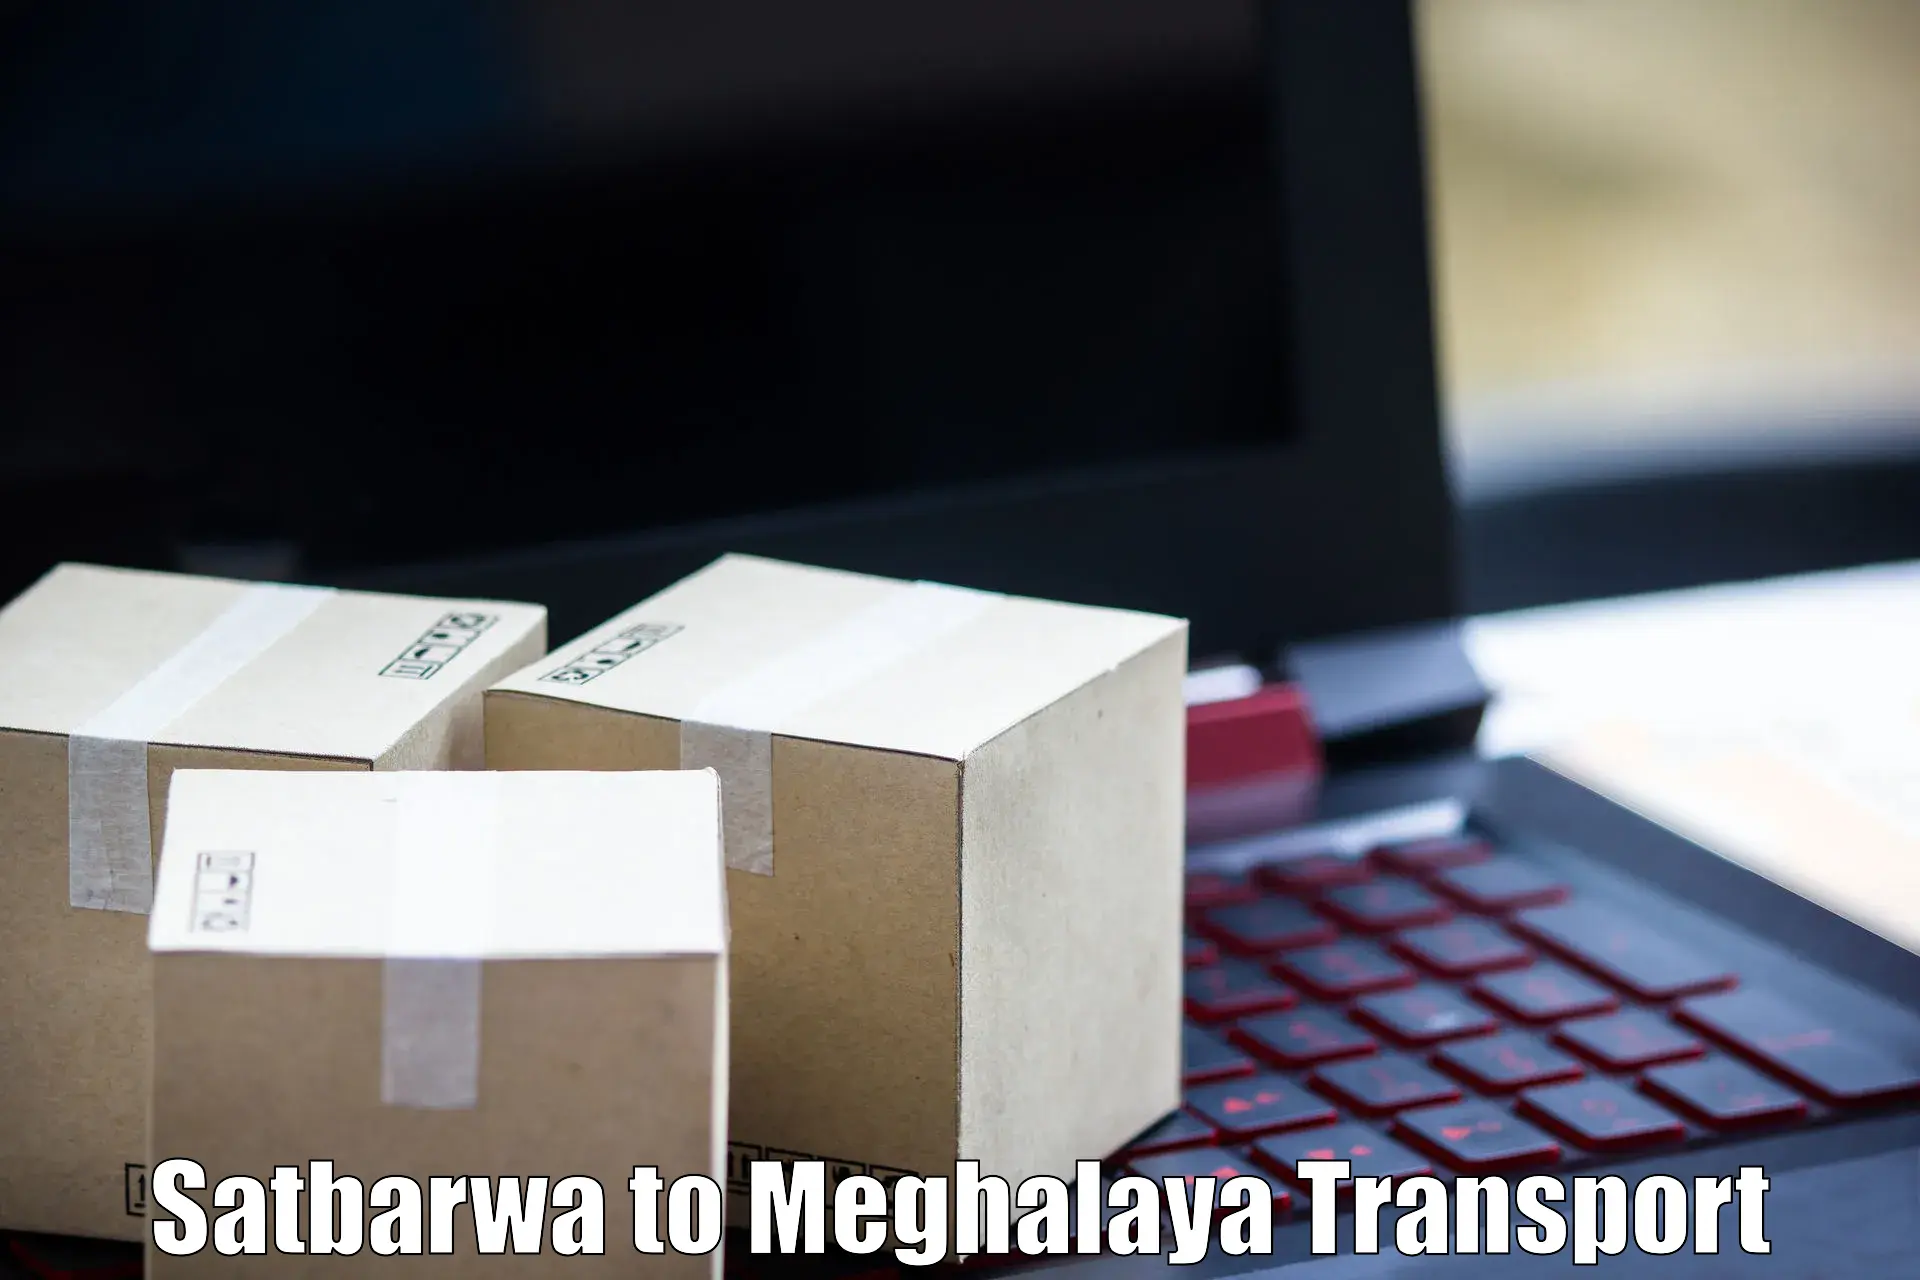 Parcel transport services Satbarwa to Shillong